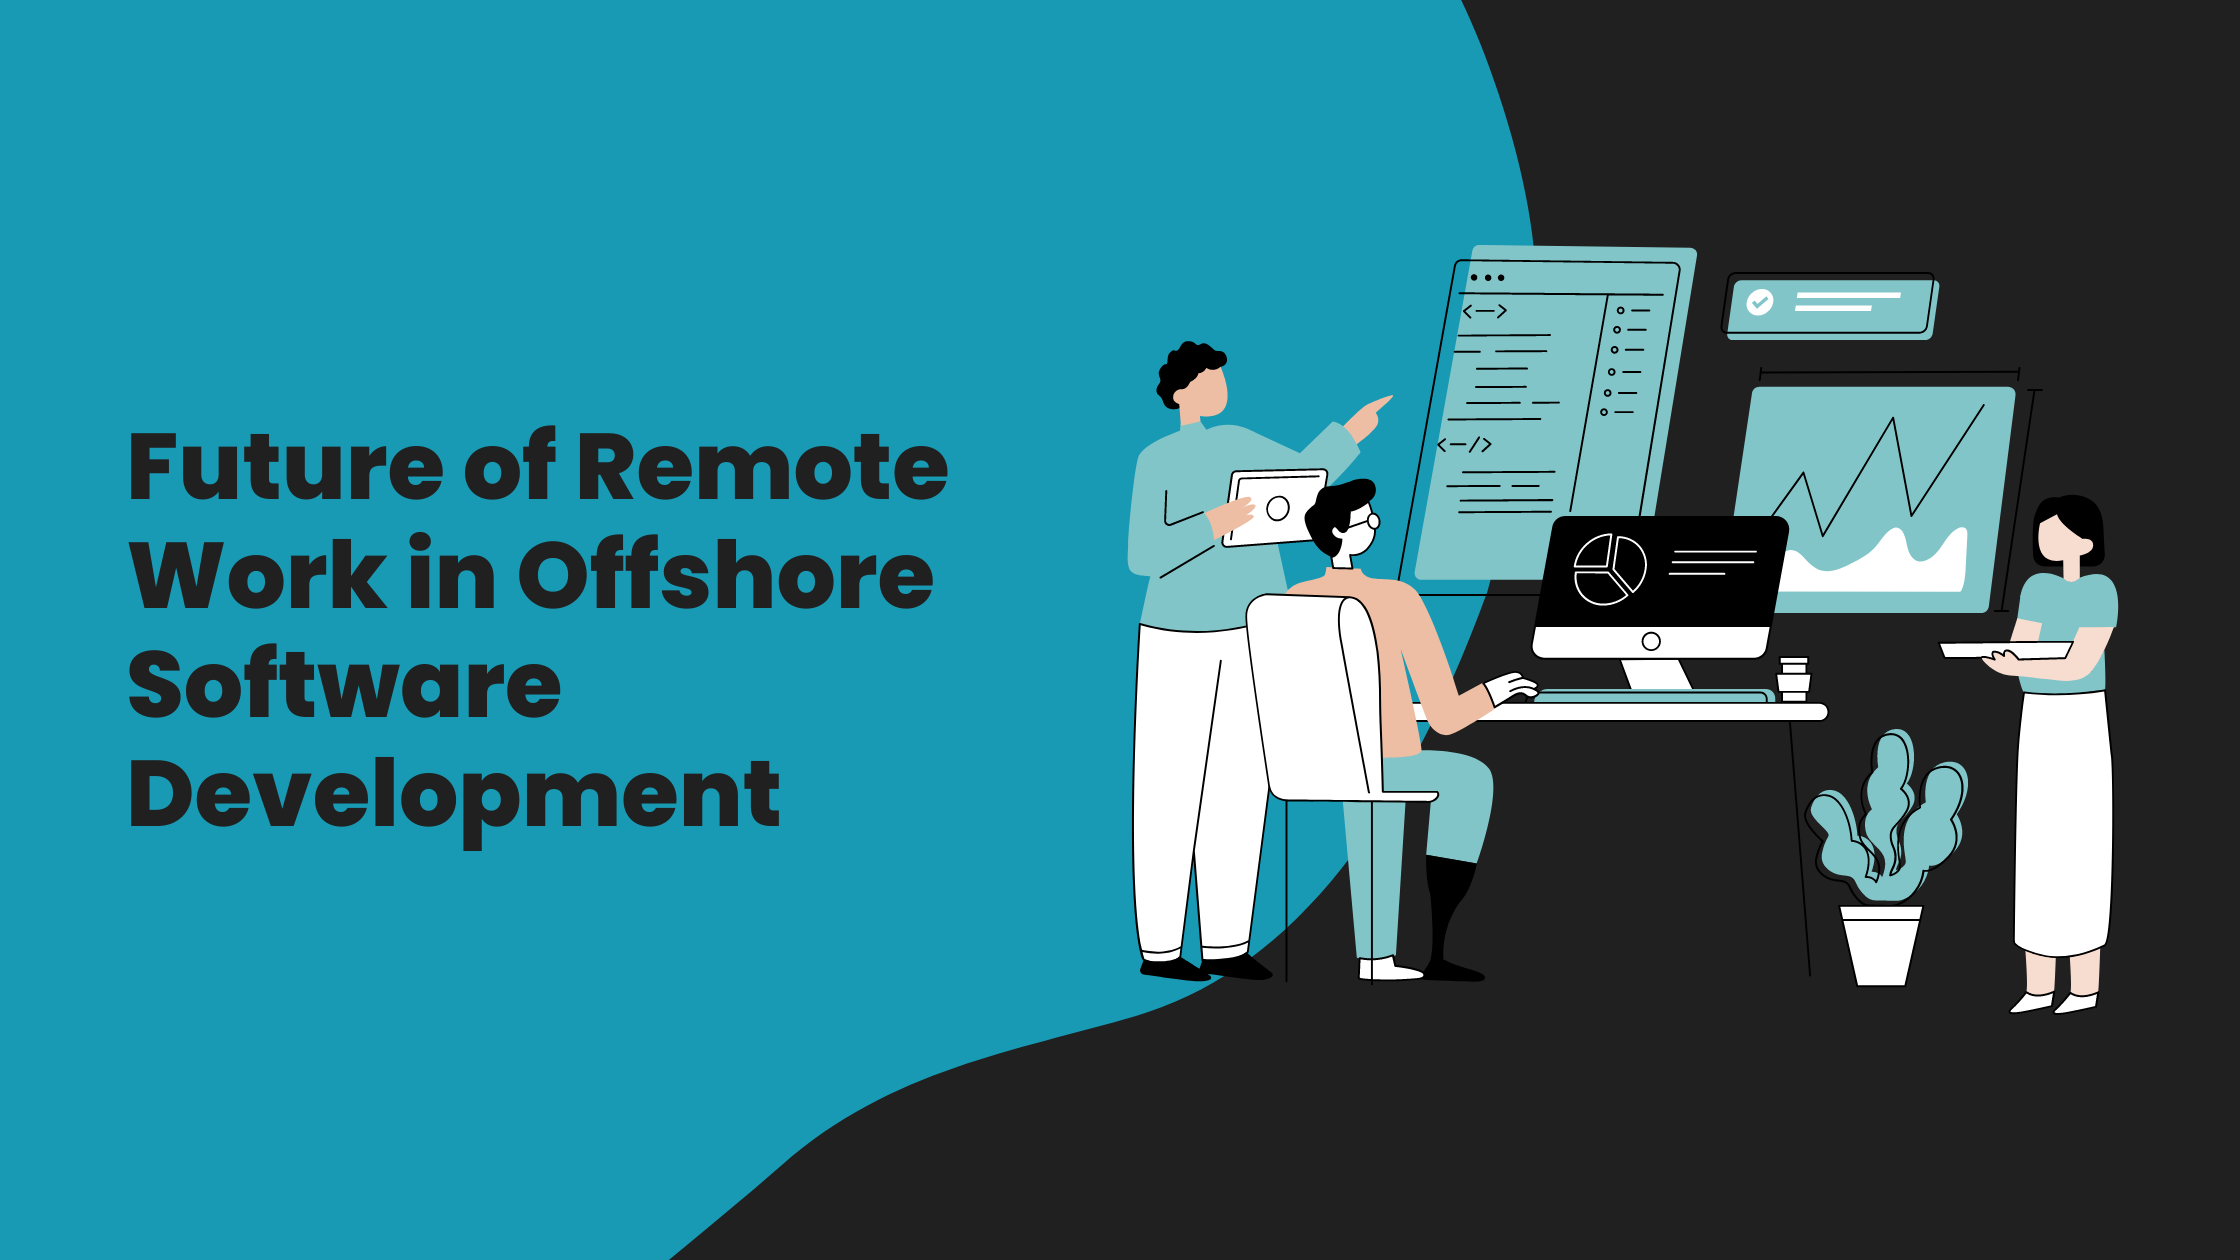 The Future of Remote Work in Offshore Software Development: Post-Pandemic Insights